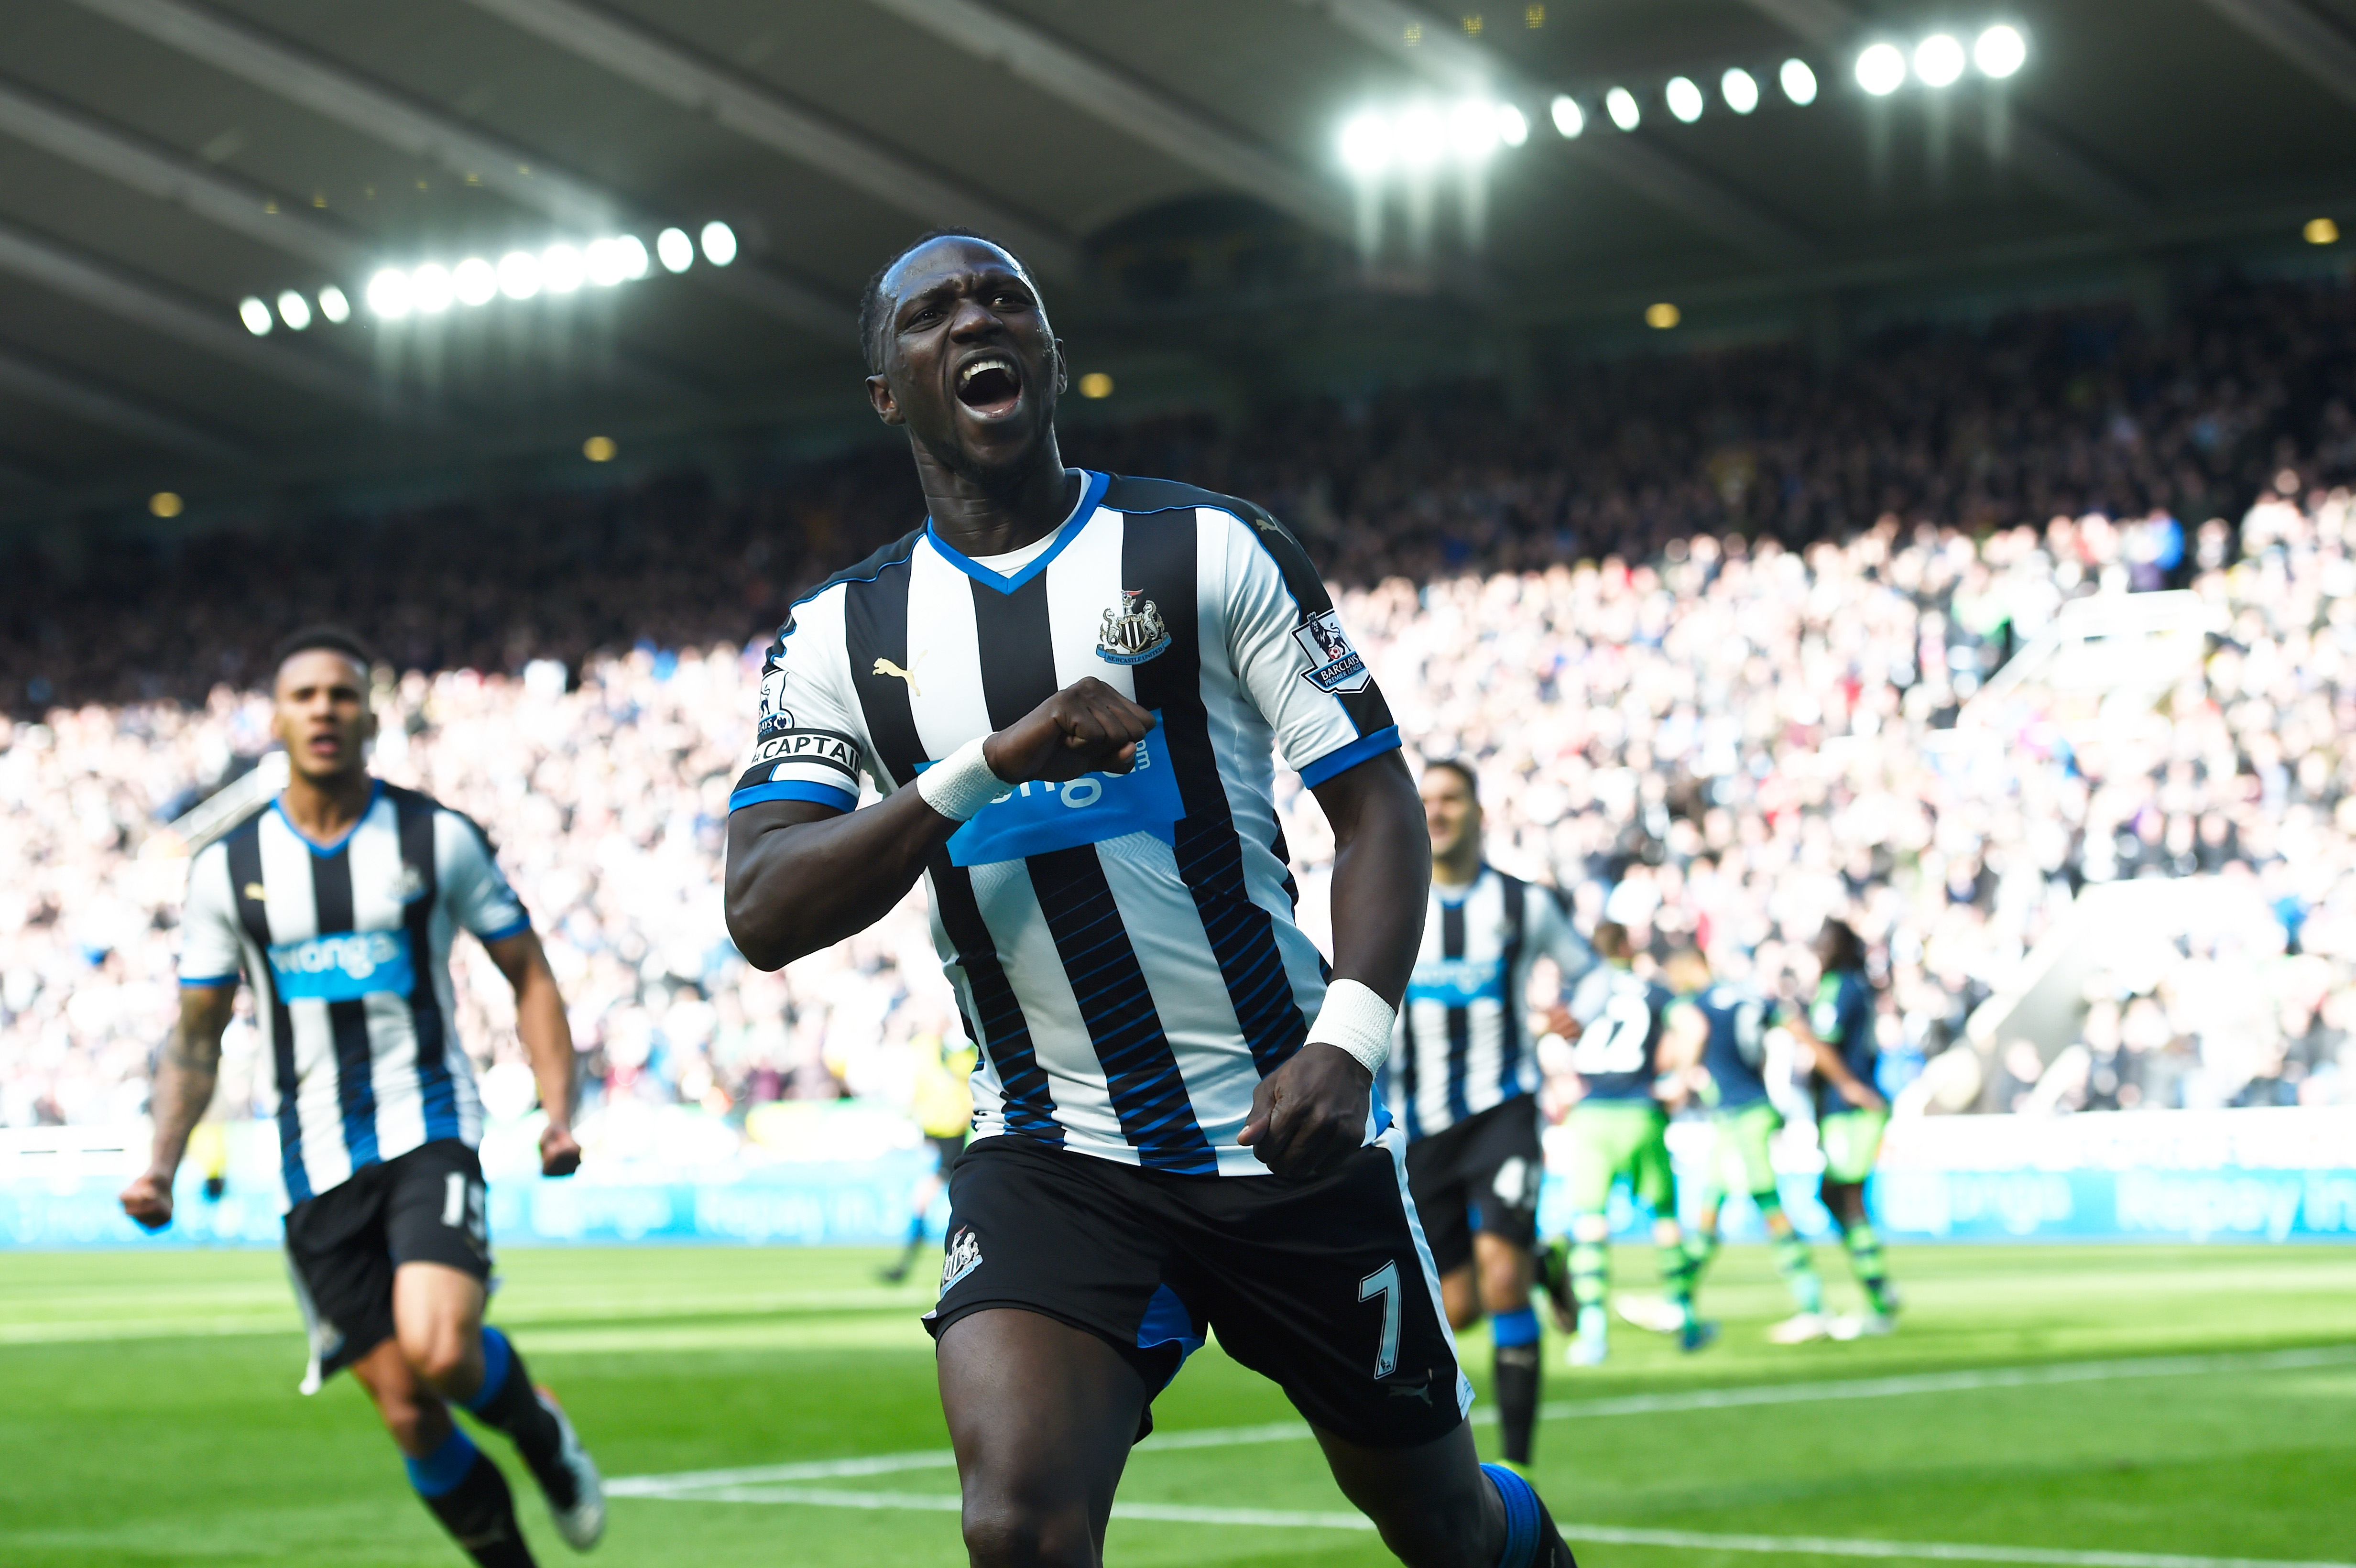 NEWCASTLE UPON TYNE, ENGLAND - APRIL 16:  Moussa Sissoko of Newcastle United celebrates scoring his sides second goal during the Barclays Premier League match between Newcastle United and Swansea City at St James' Park on April 16, 2016 in Newcastle, England.  (Photo by Stu Forster/Getty Images)